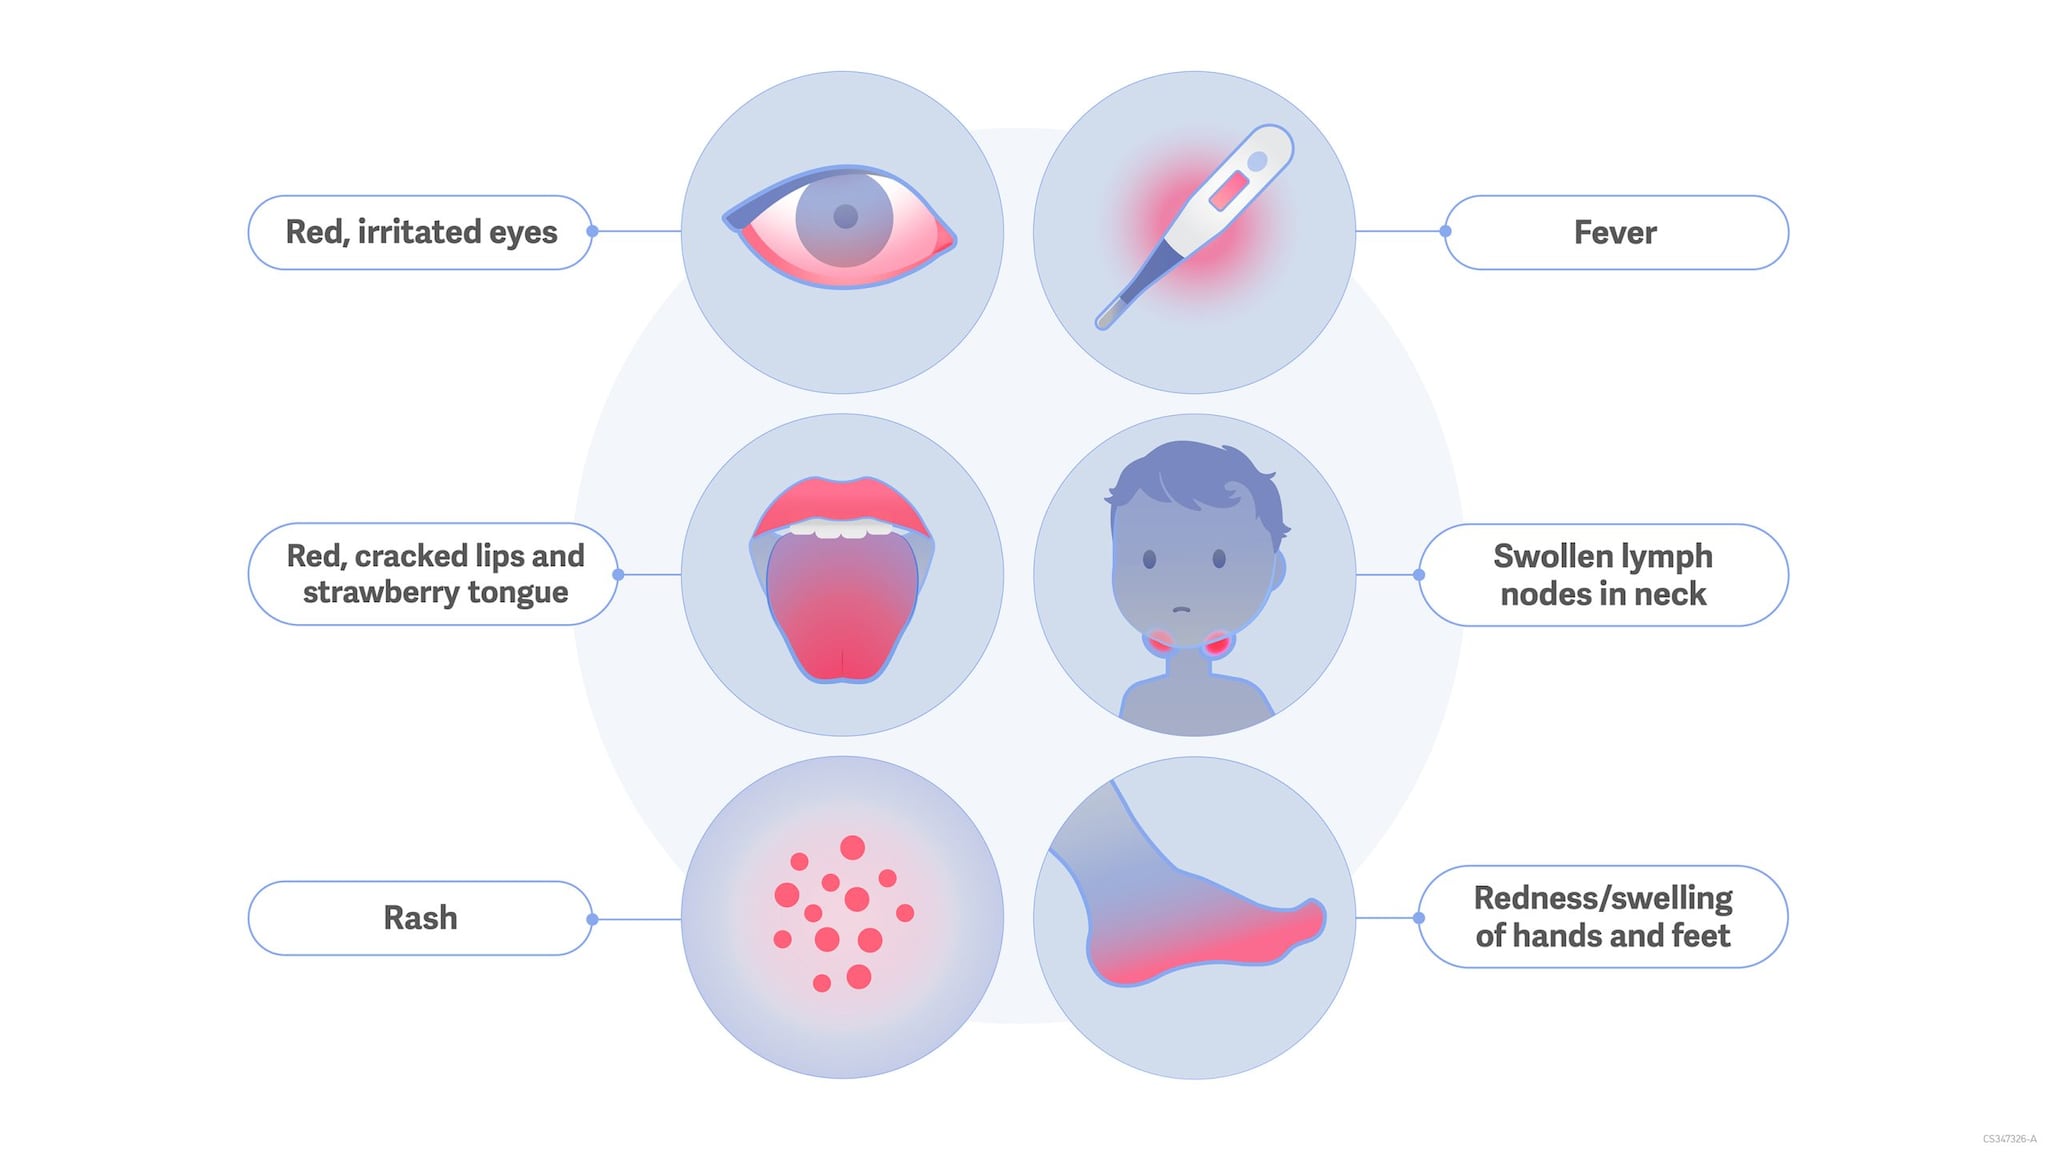 Illustration of Kawasaki Disease signs and symptoms, including red eyes, strawberry tongue, rash, fever, swollen lymph nodes, and red and swollen hands and feet